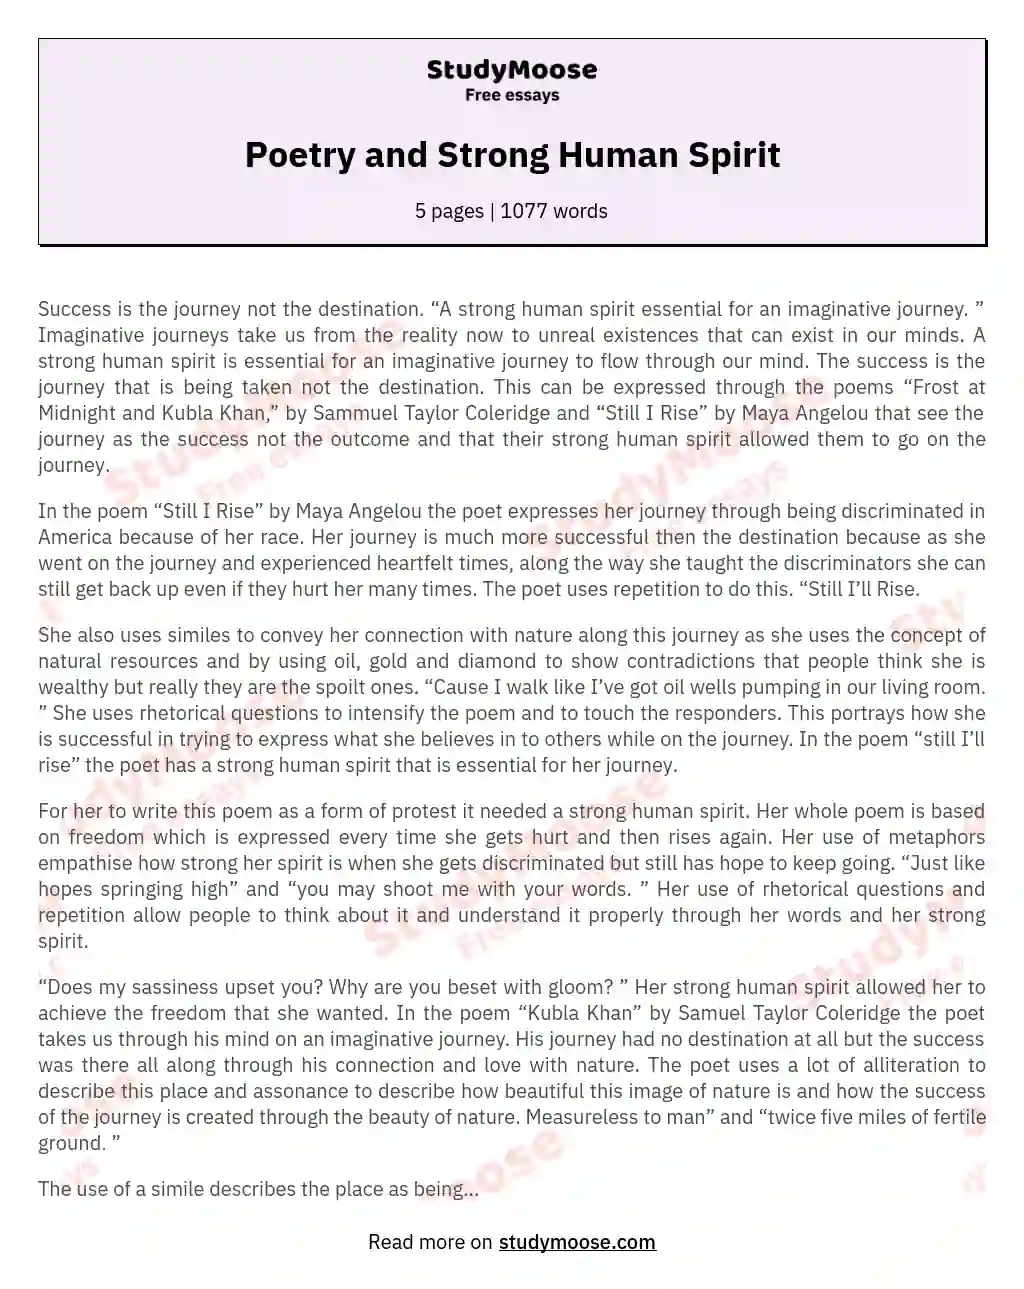 Poetry and Strong Human Spirit